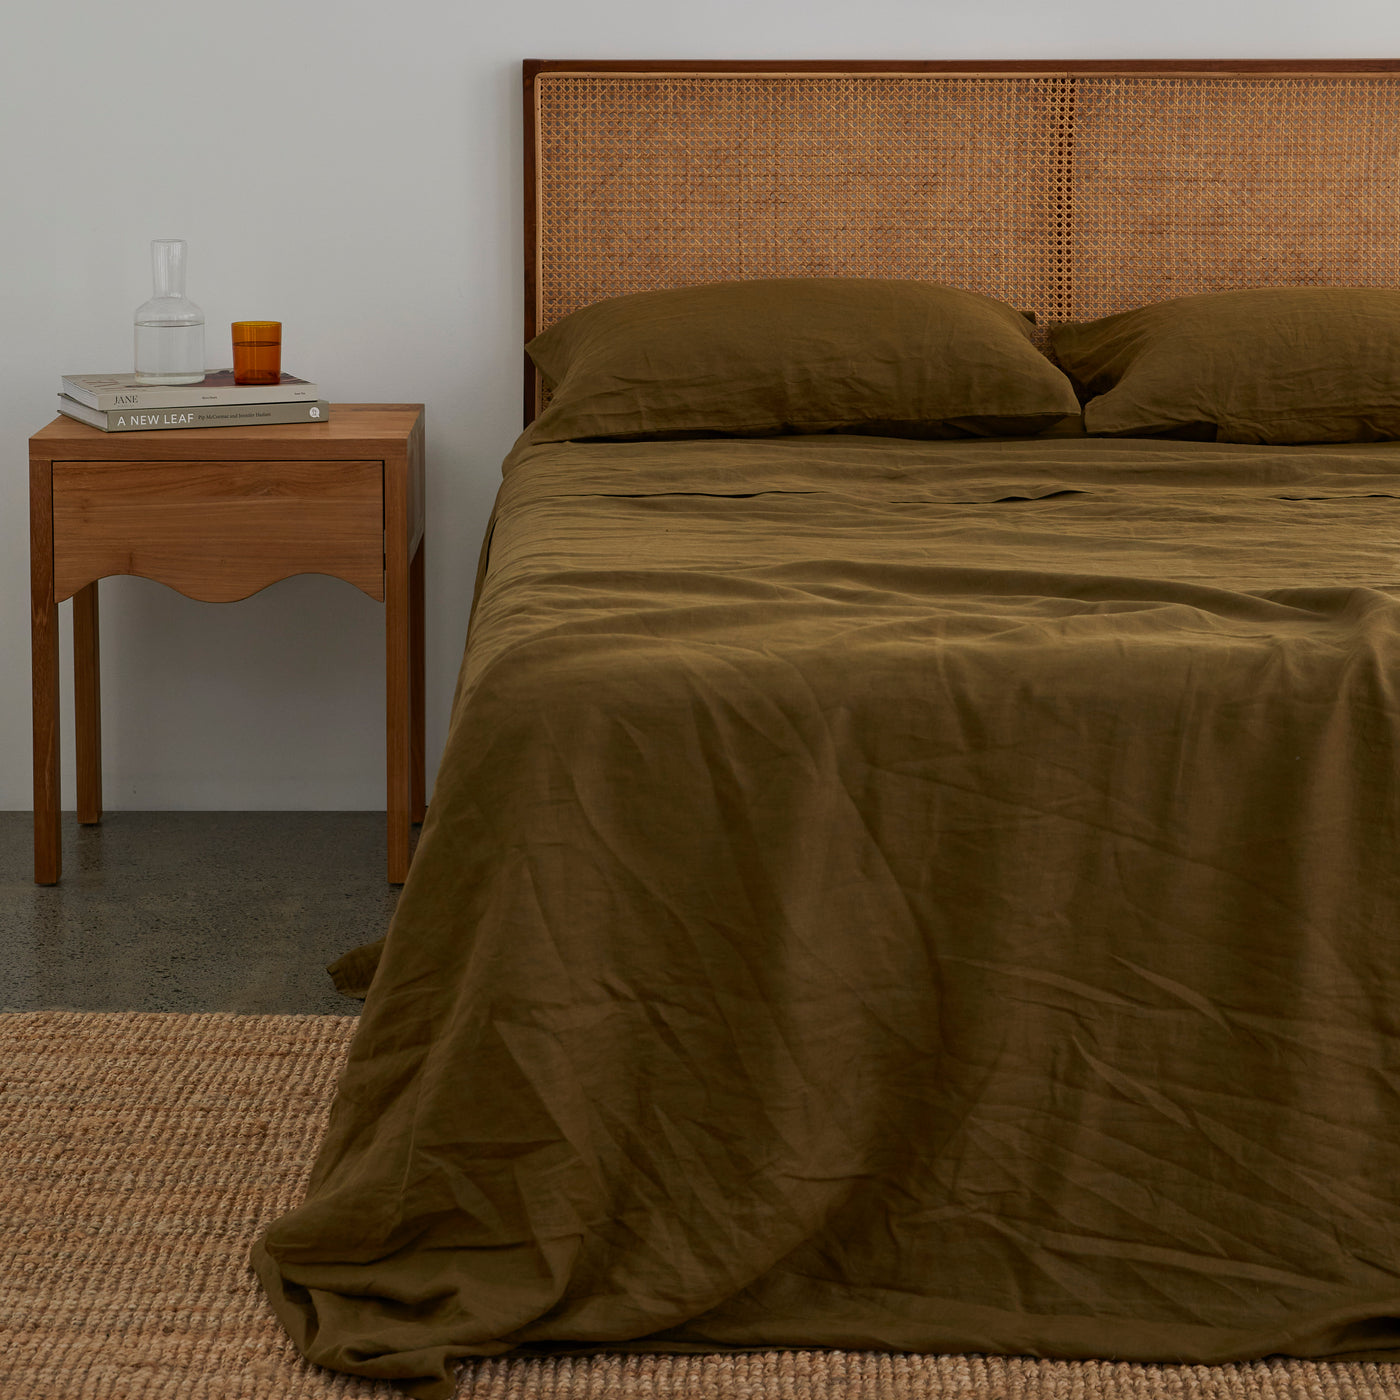 French Flax Linen Sheet Set in Olive